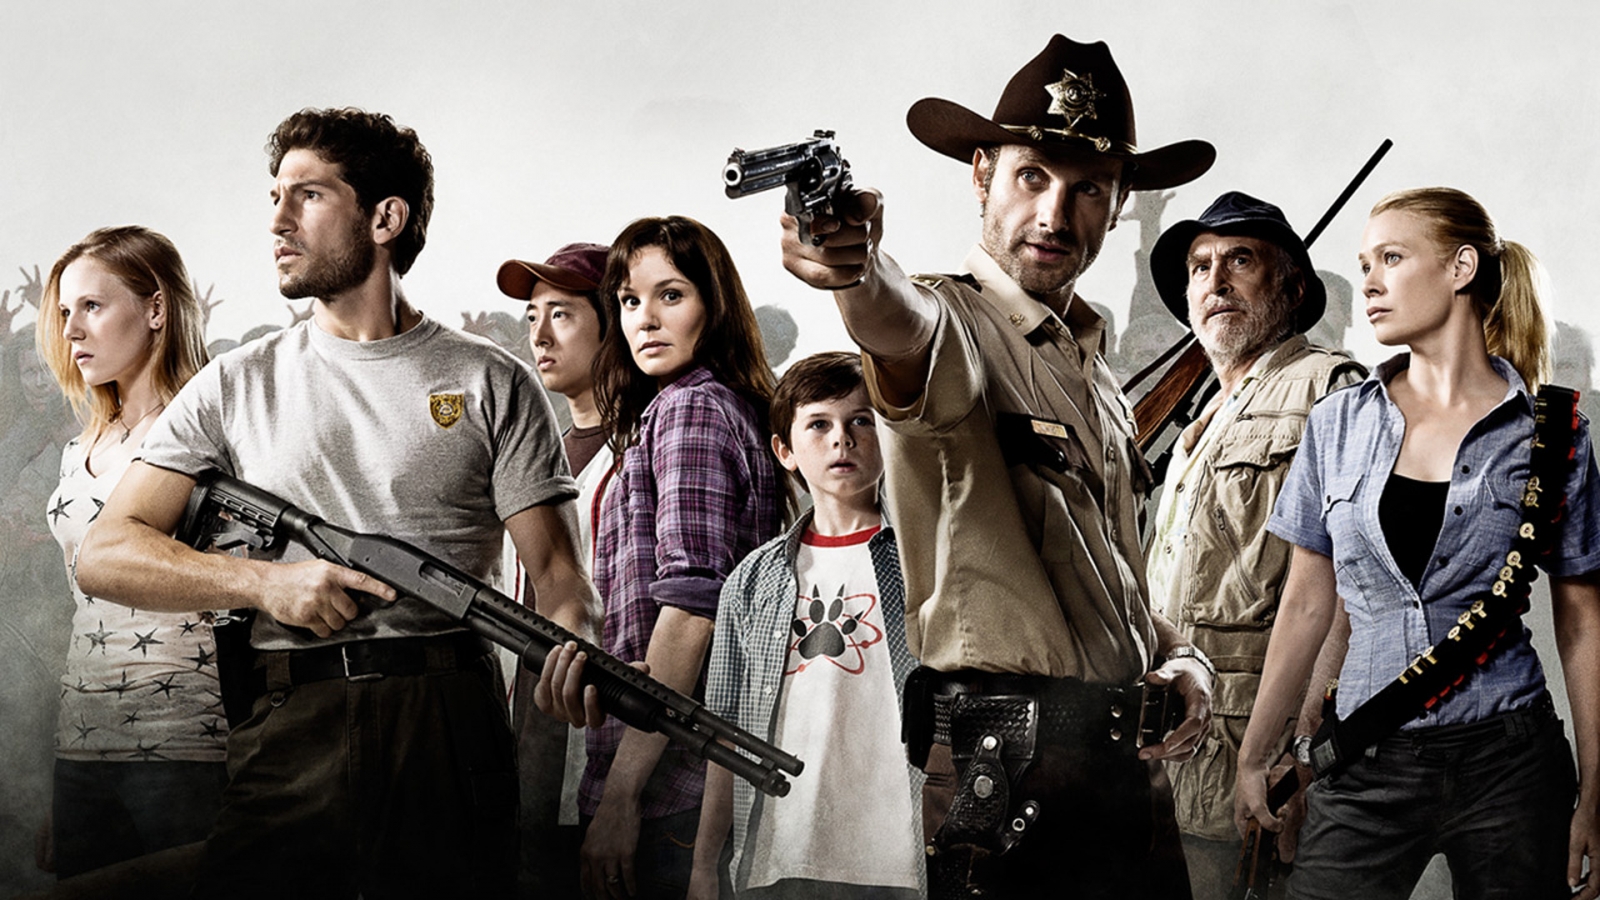 The Walking Dead Characters for 1600 x 900 HDTV resolution